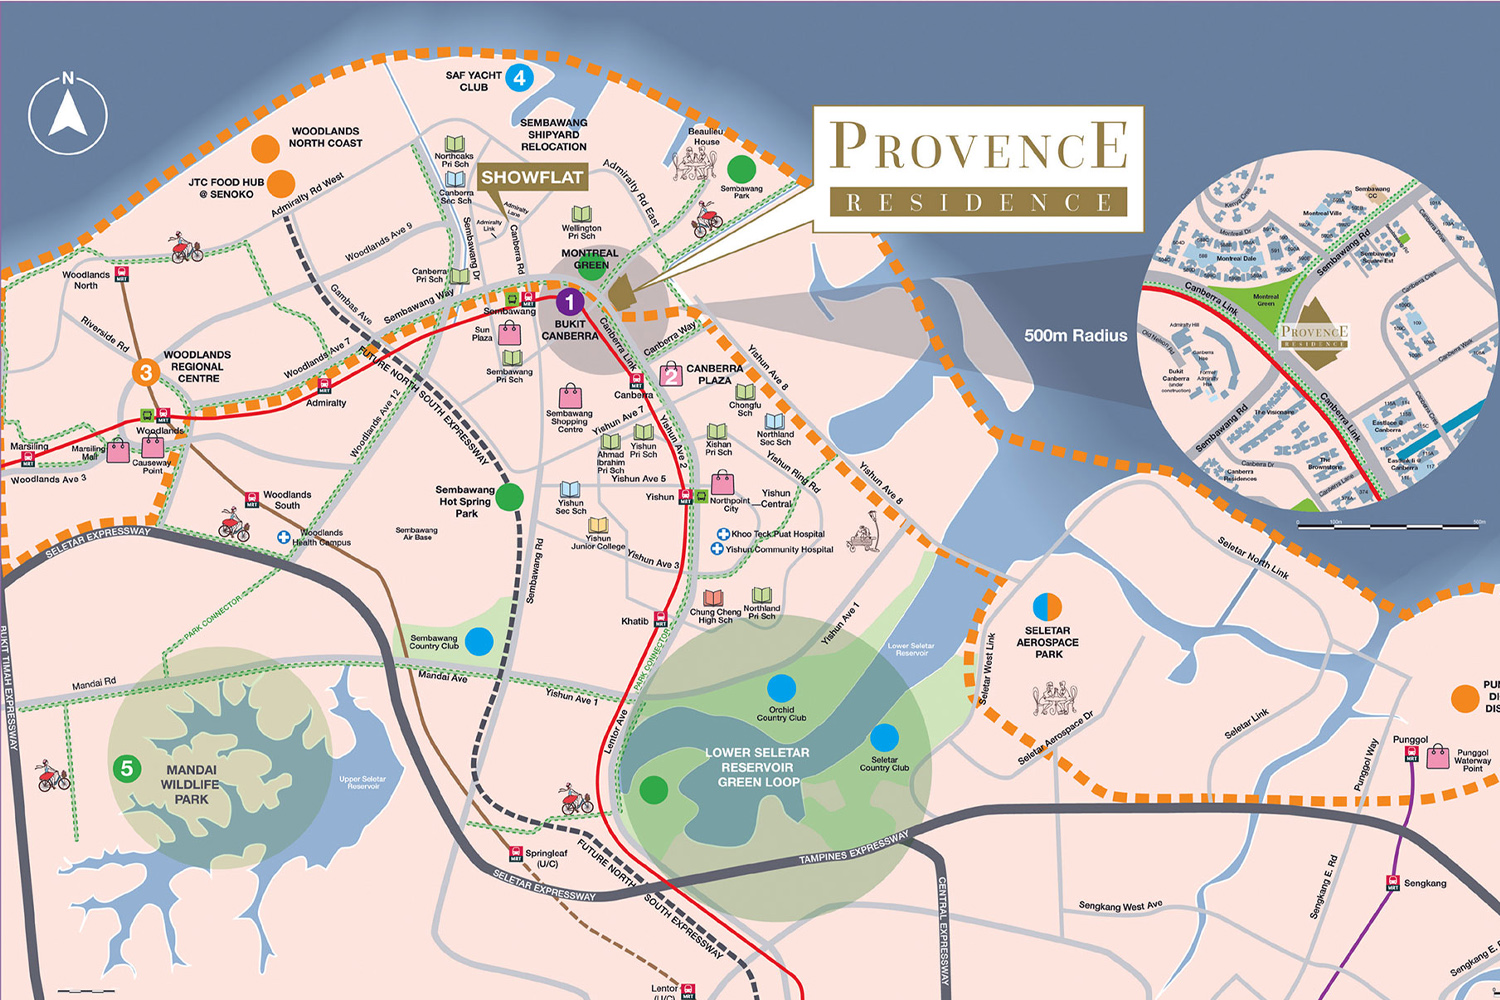 Provence Residences - new launch condo with a potential location